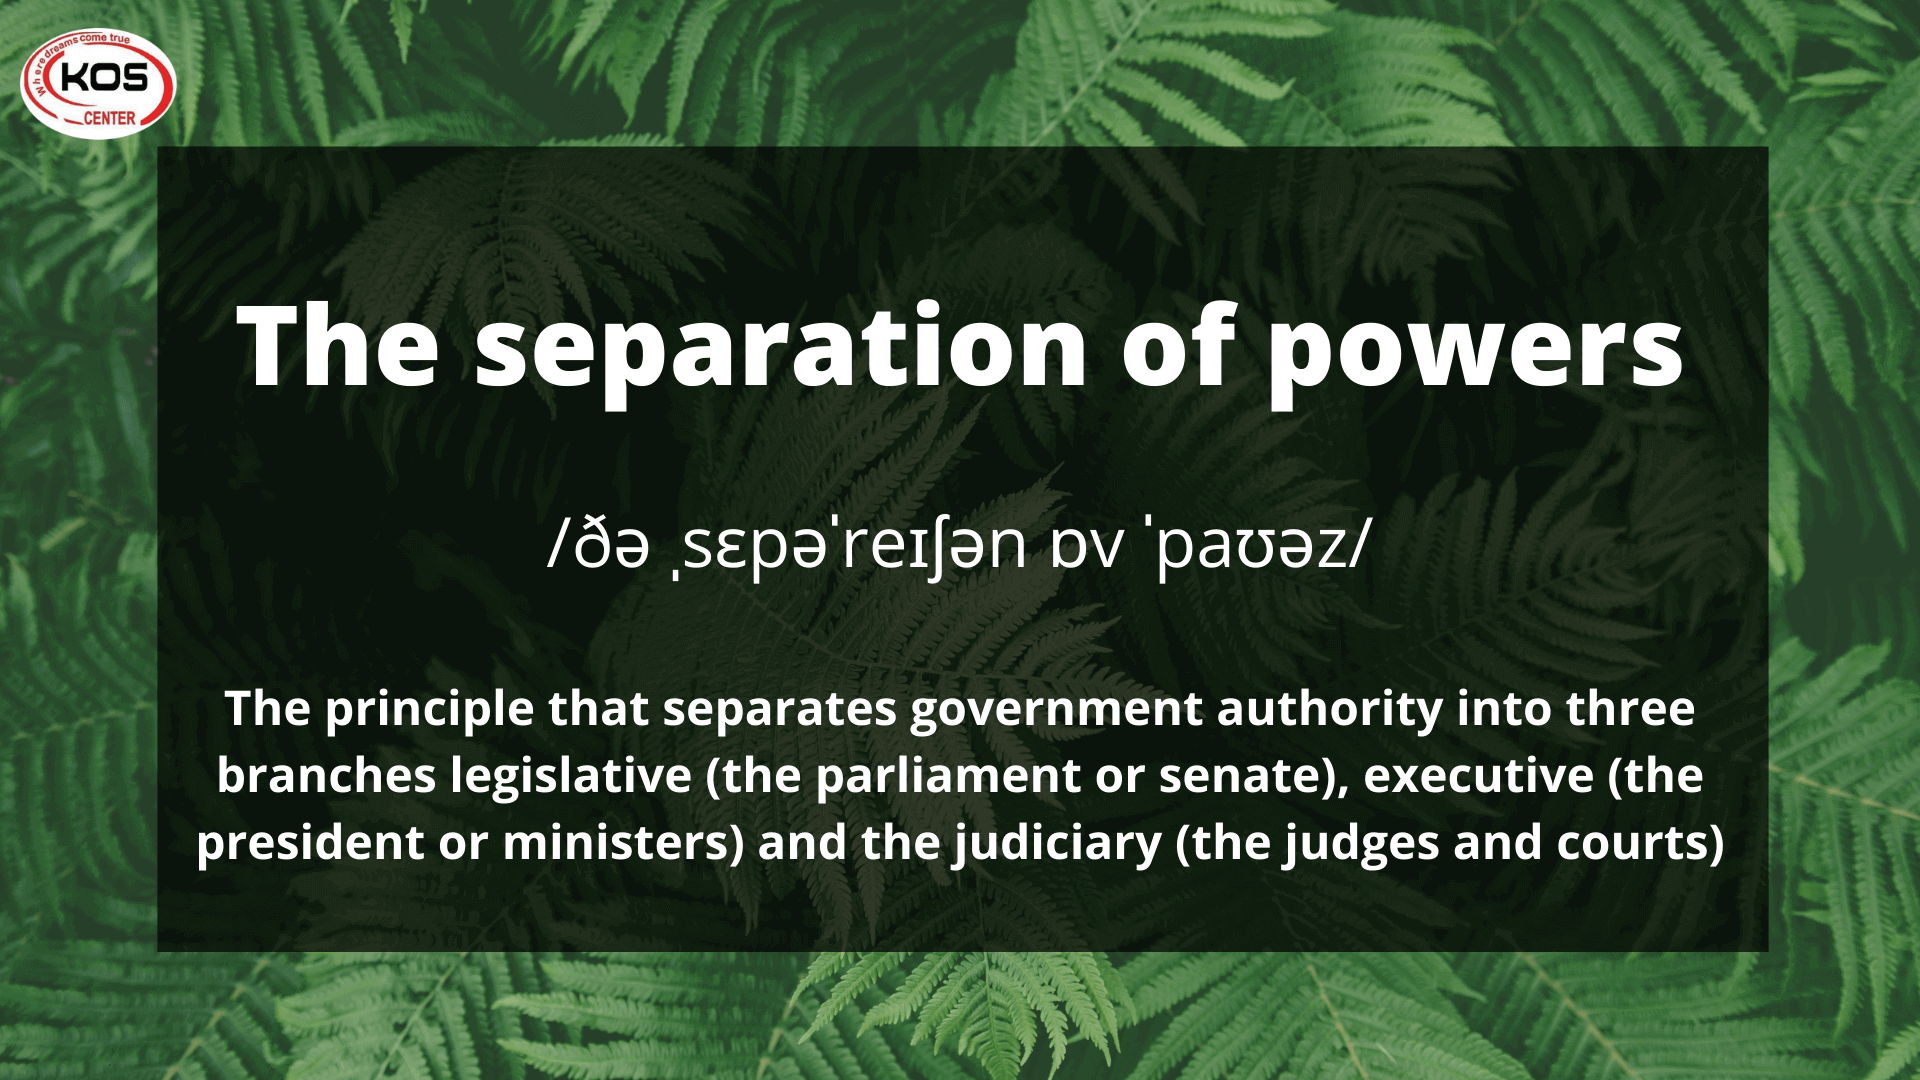 The separation of powers